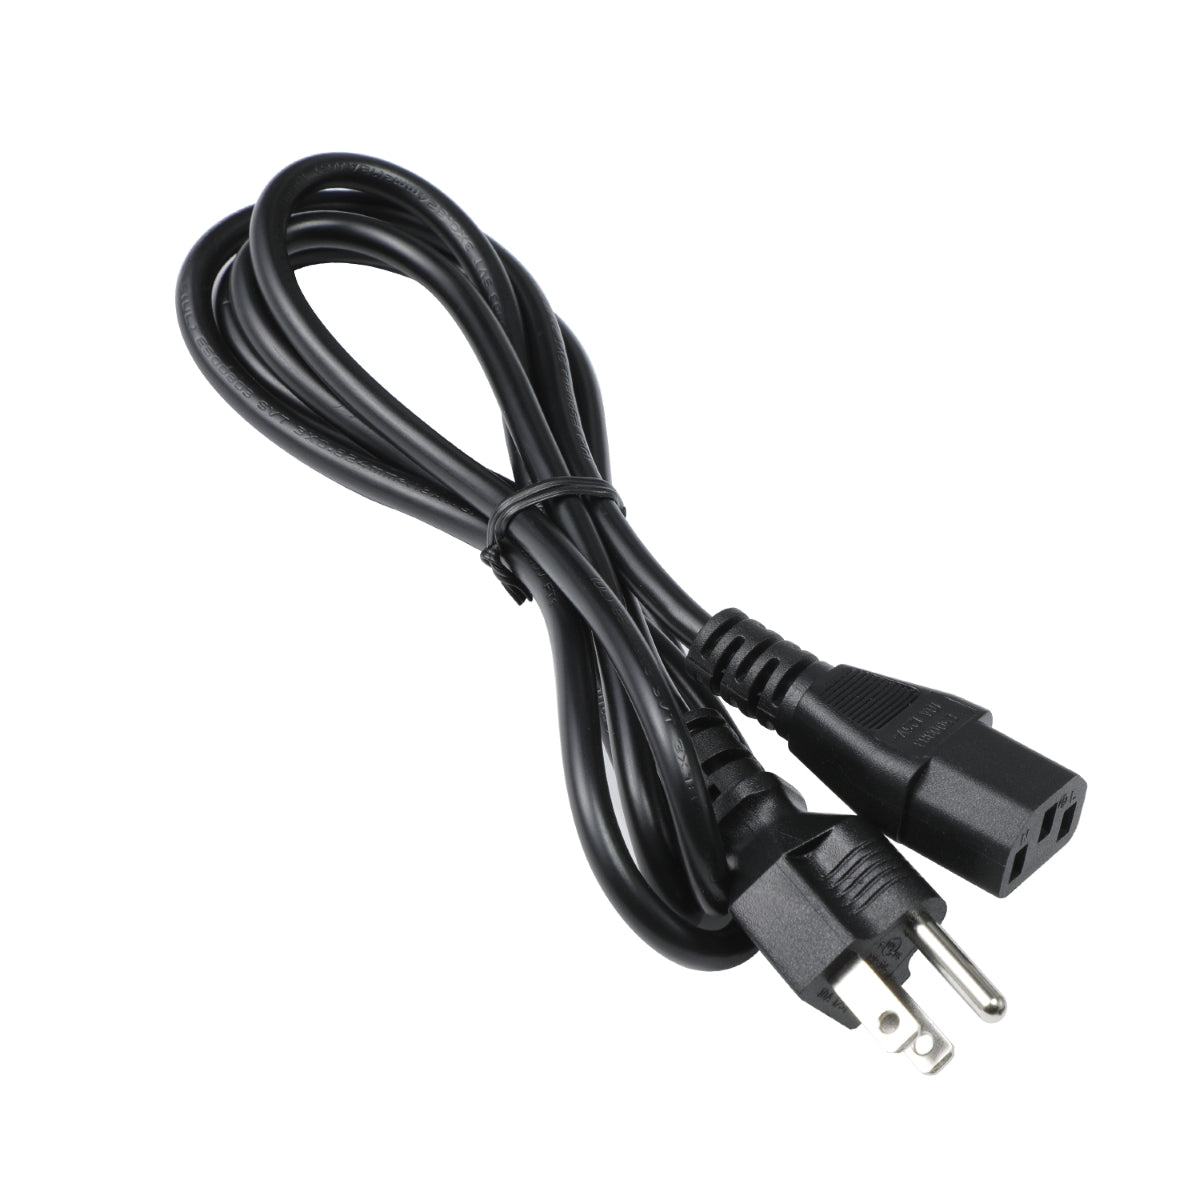 Power Cord for HP W2072a Monitor